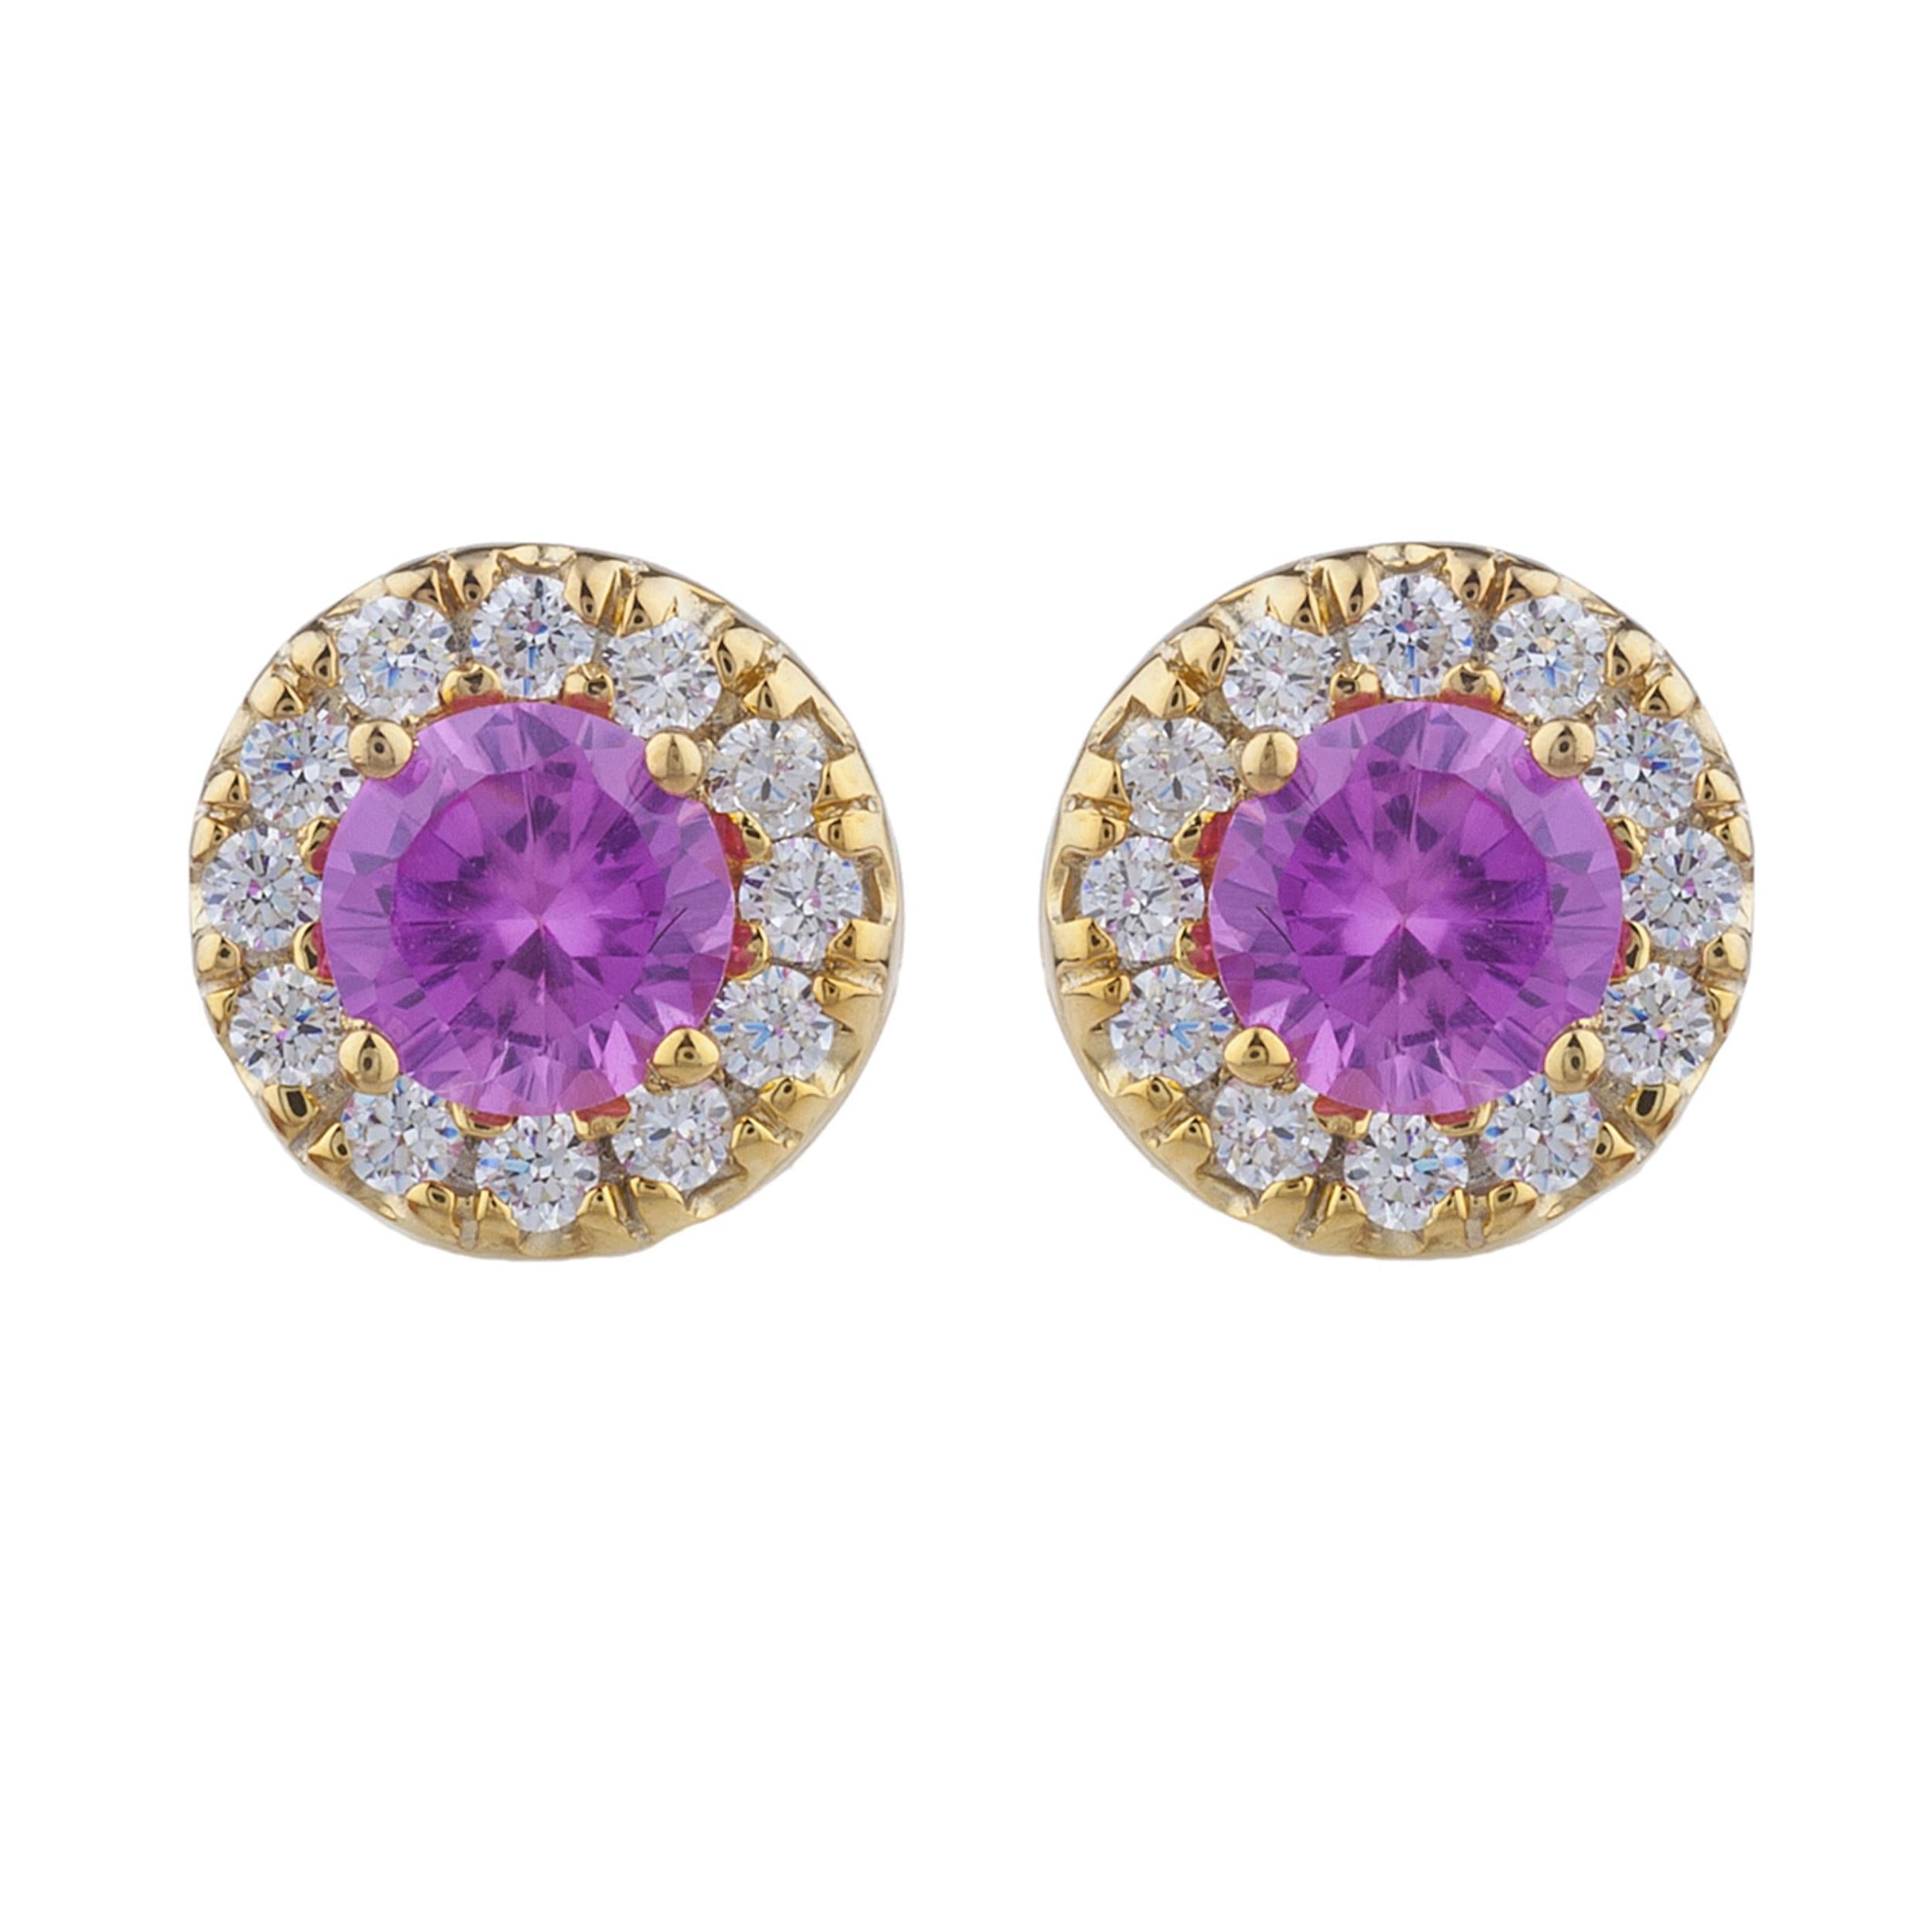 14Kt Gold 1 Ct Pink Sapphire Halo Design Stud Earrings